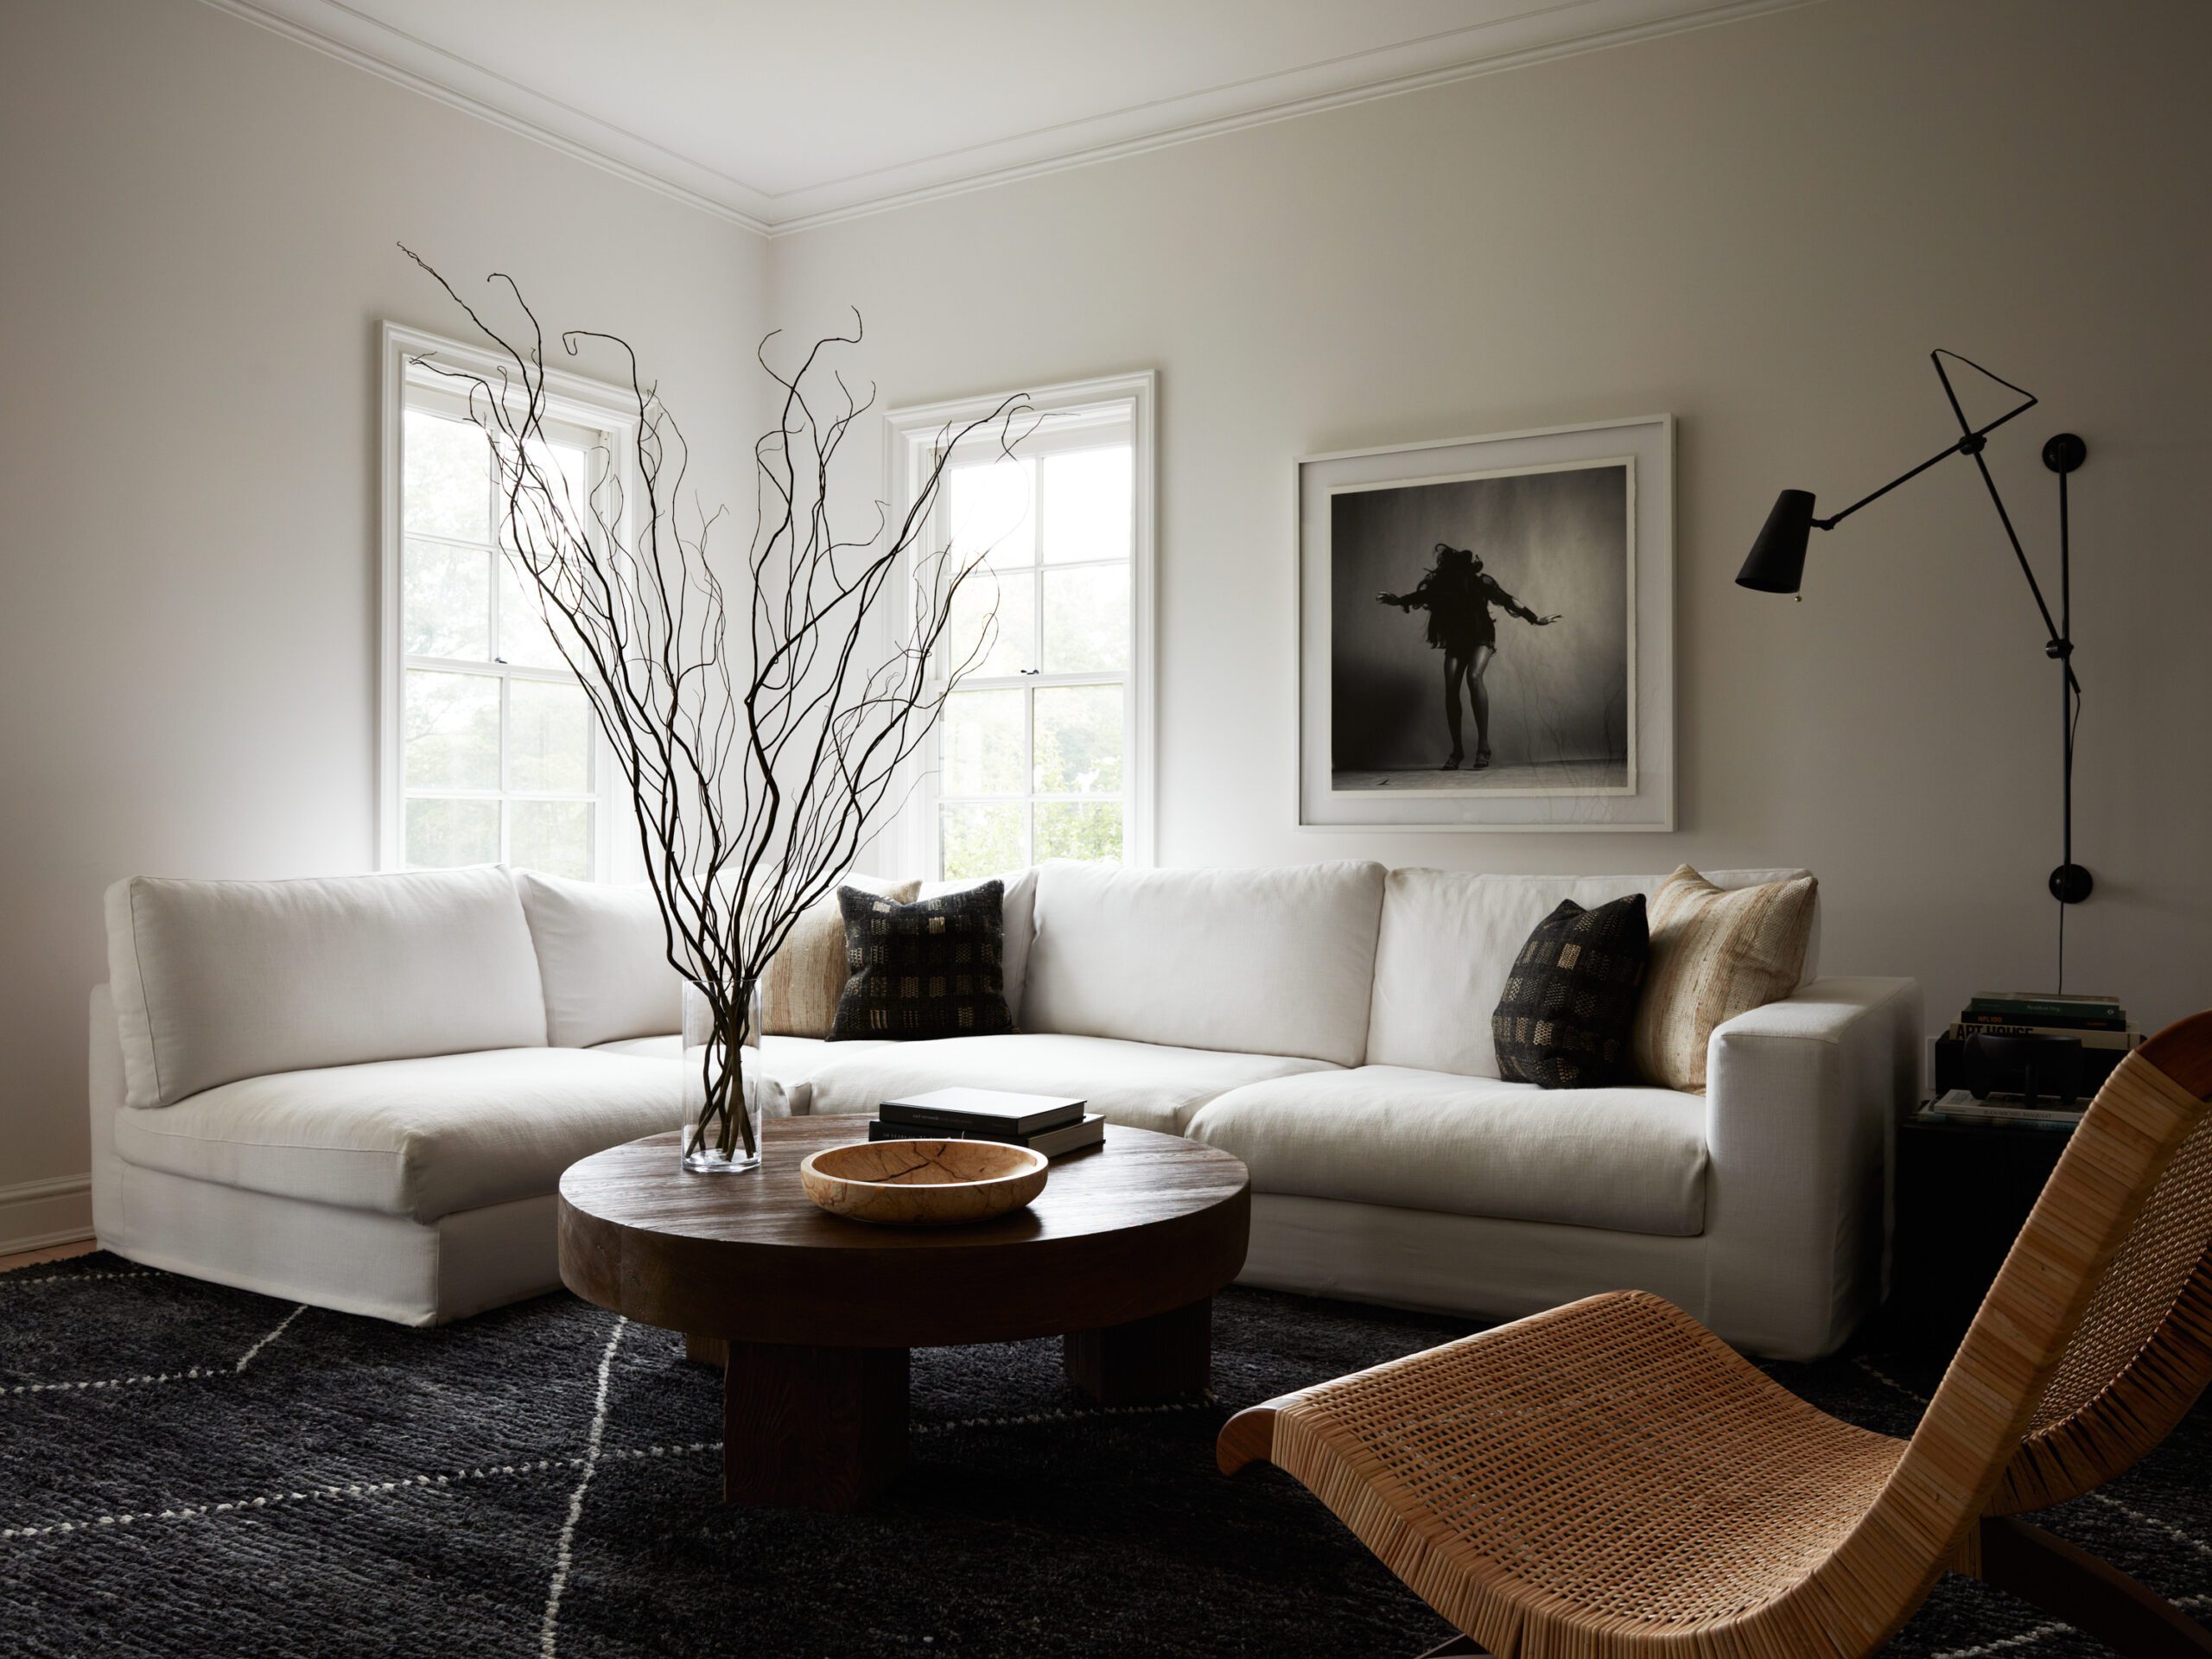 Full Living Room with White Couch